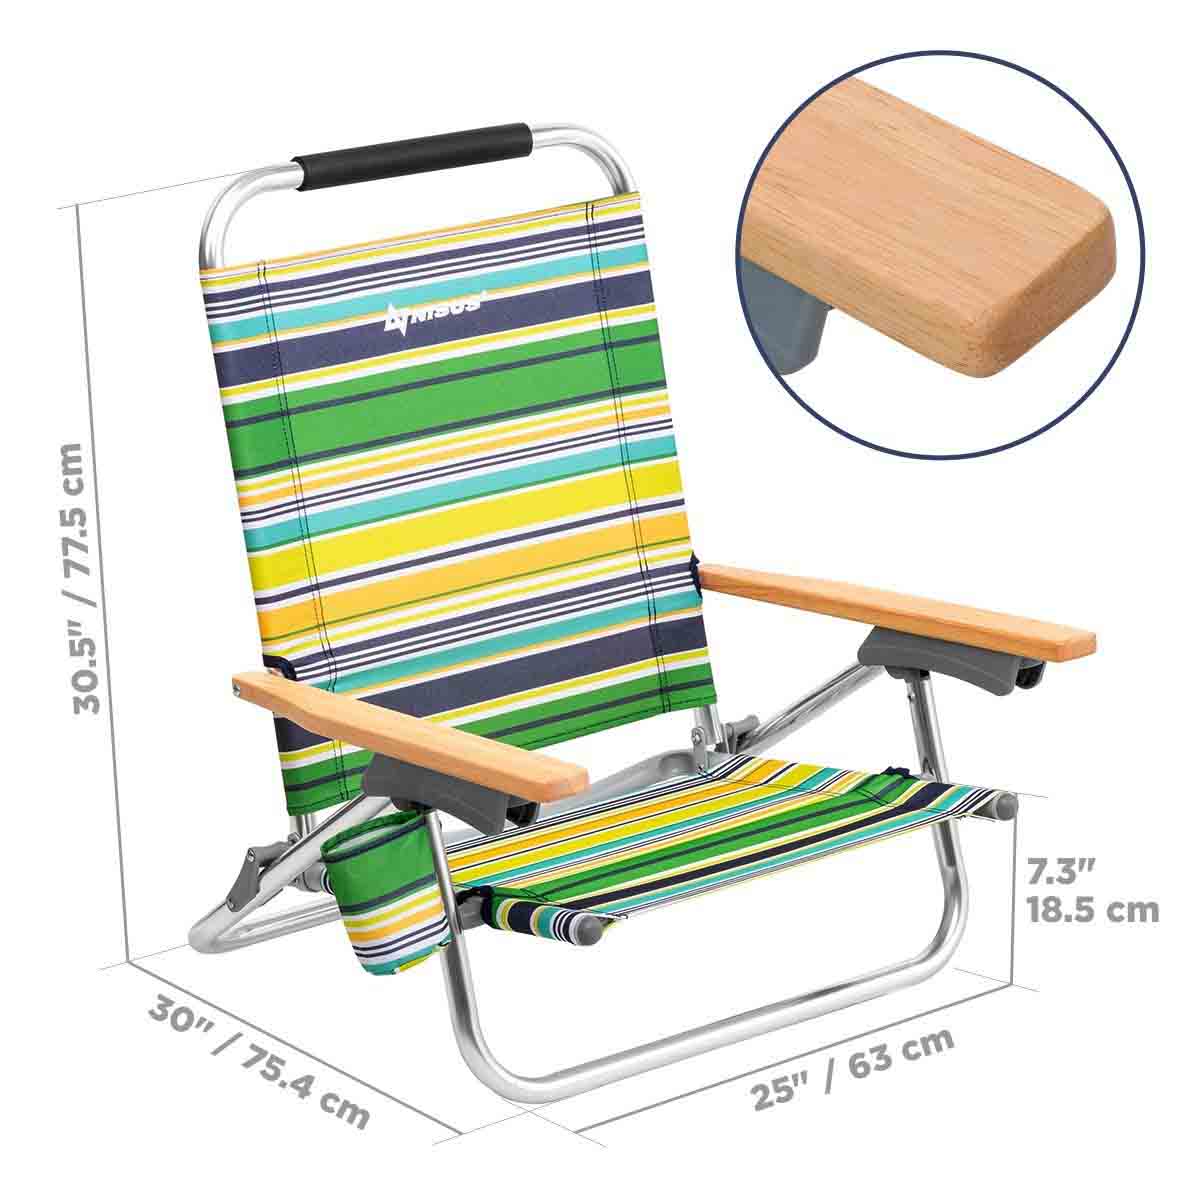 Lightest Backpack Beach Chair with Cup Holder is 30.5 inches high, 30 inches long, 25 inches wide and 7.3 inches deep, it's equipped with armrest made of wood